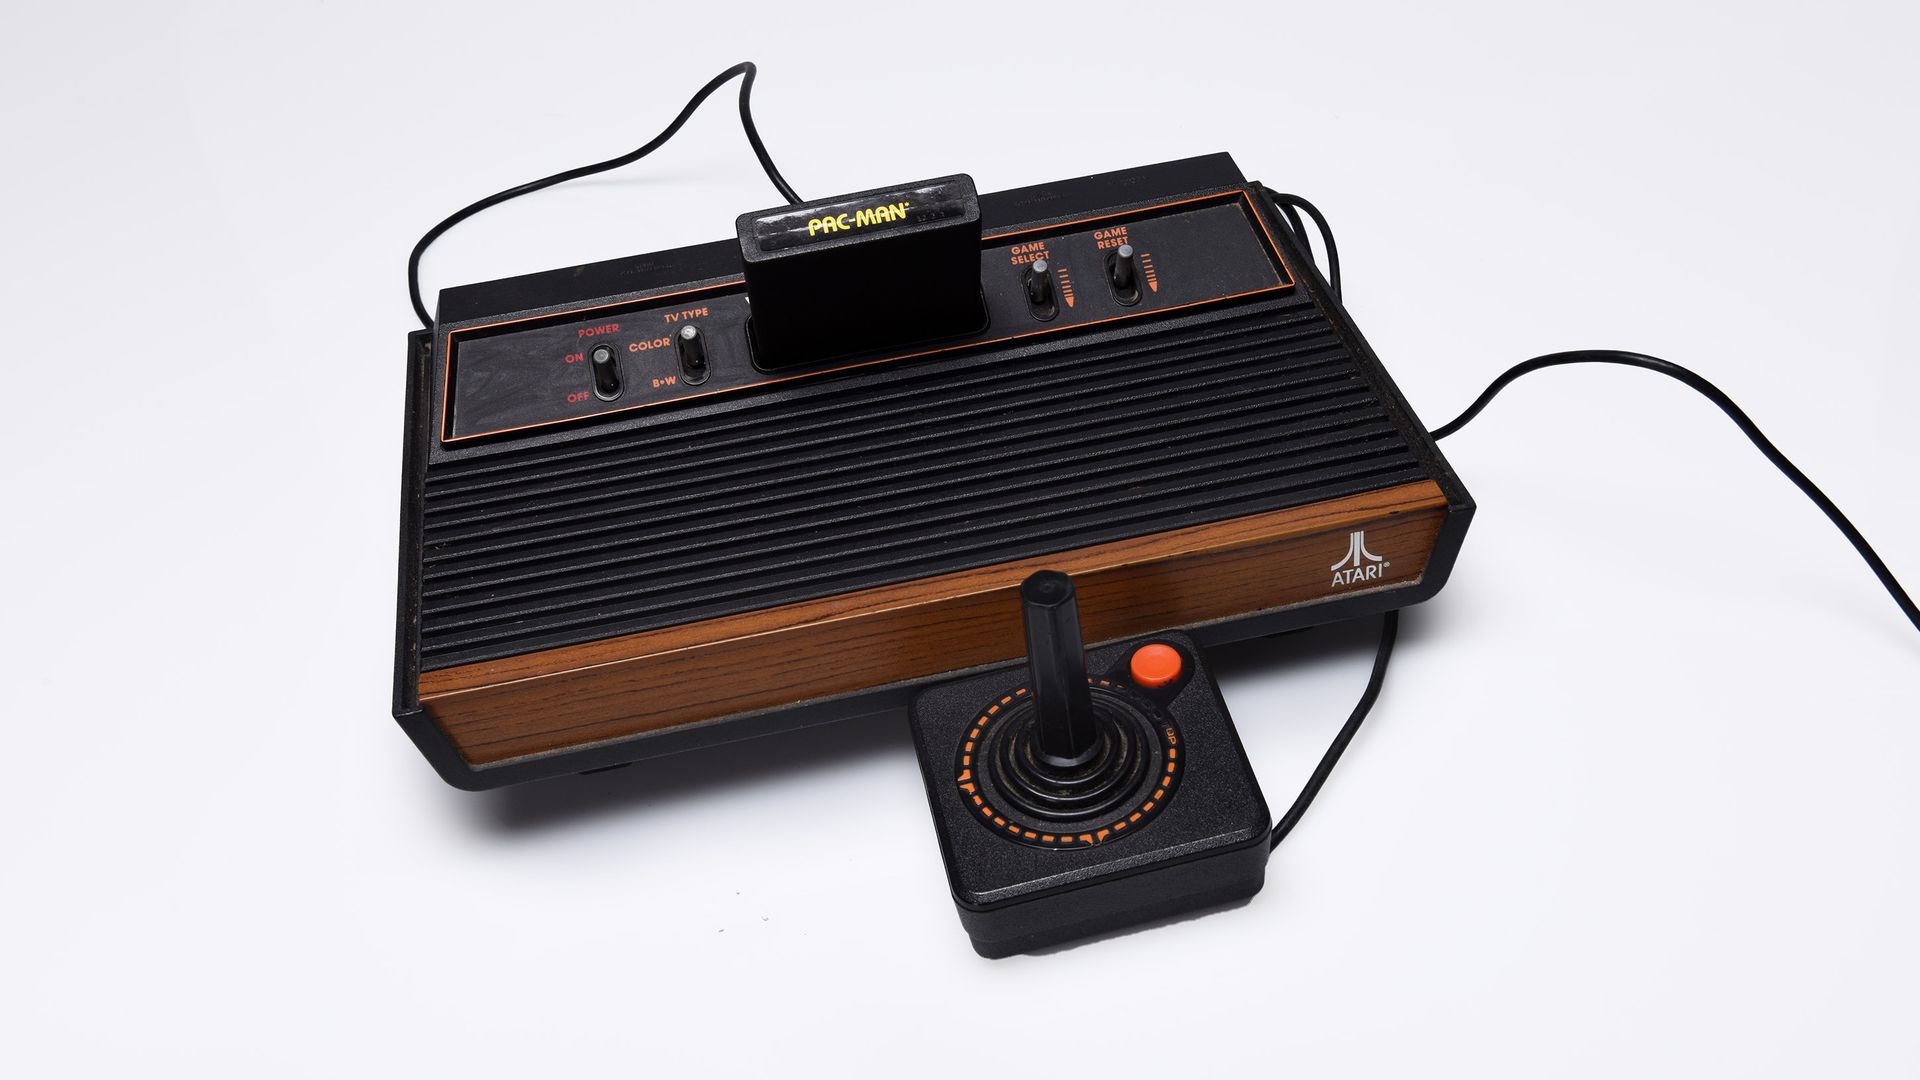 Black and brown video game console with a joystick controller attached